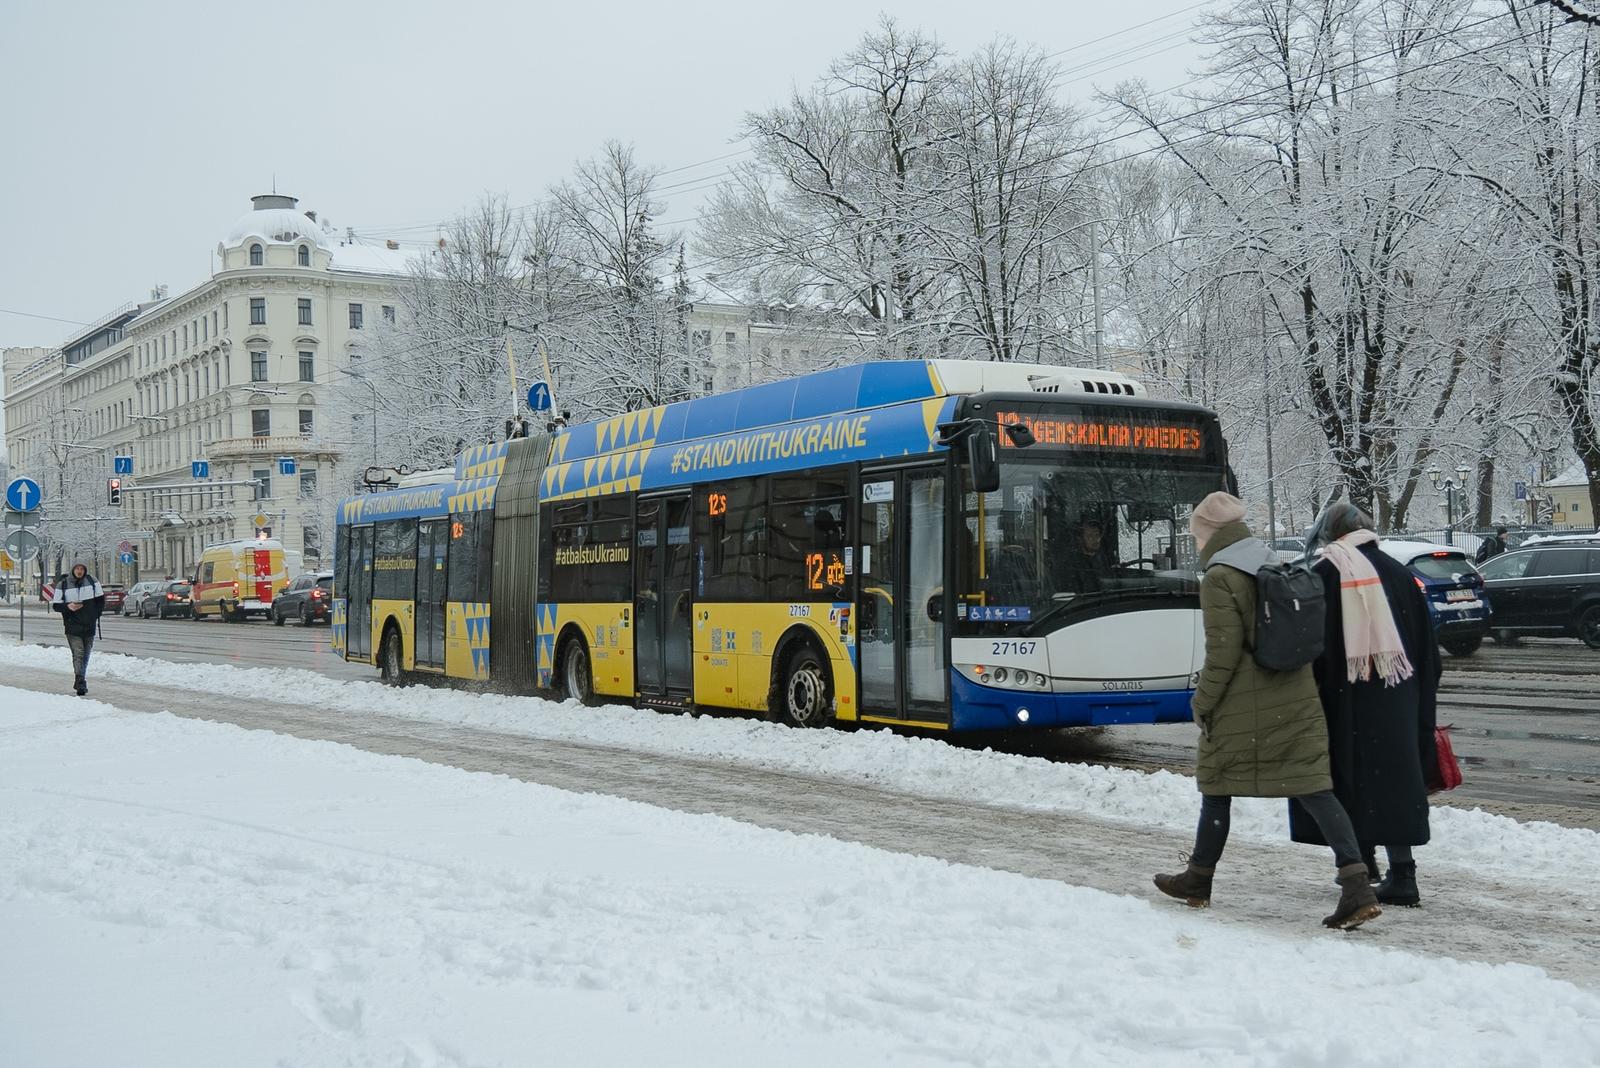 Another trolleybus with the United24 logo now operates in Riga